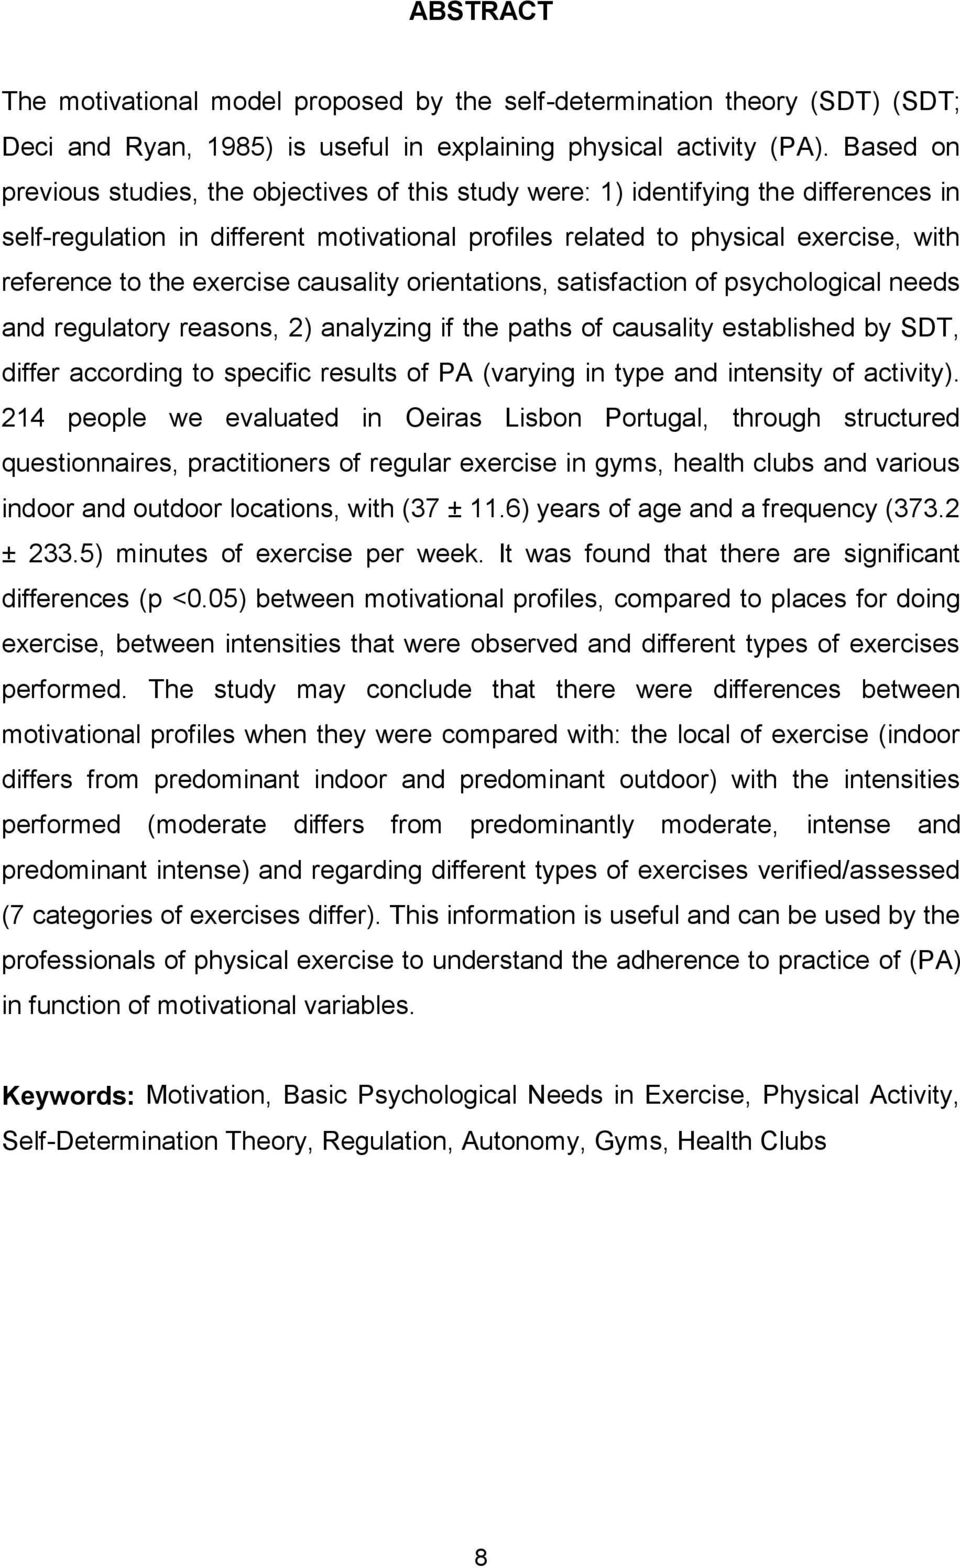 exercise causality orientations, satisfaction of psychological needs and regulatory reasons, 2) analyzing if the paths of causality established by SDT, differ according to specific results of PA